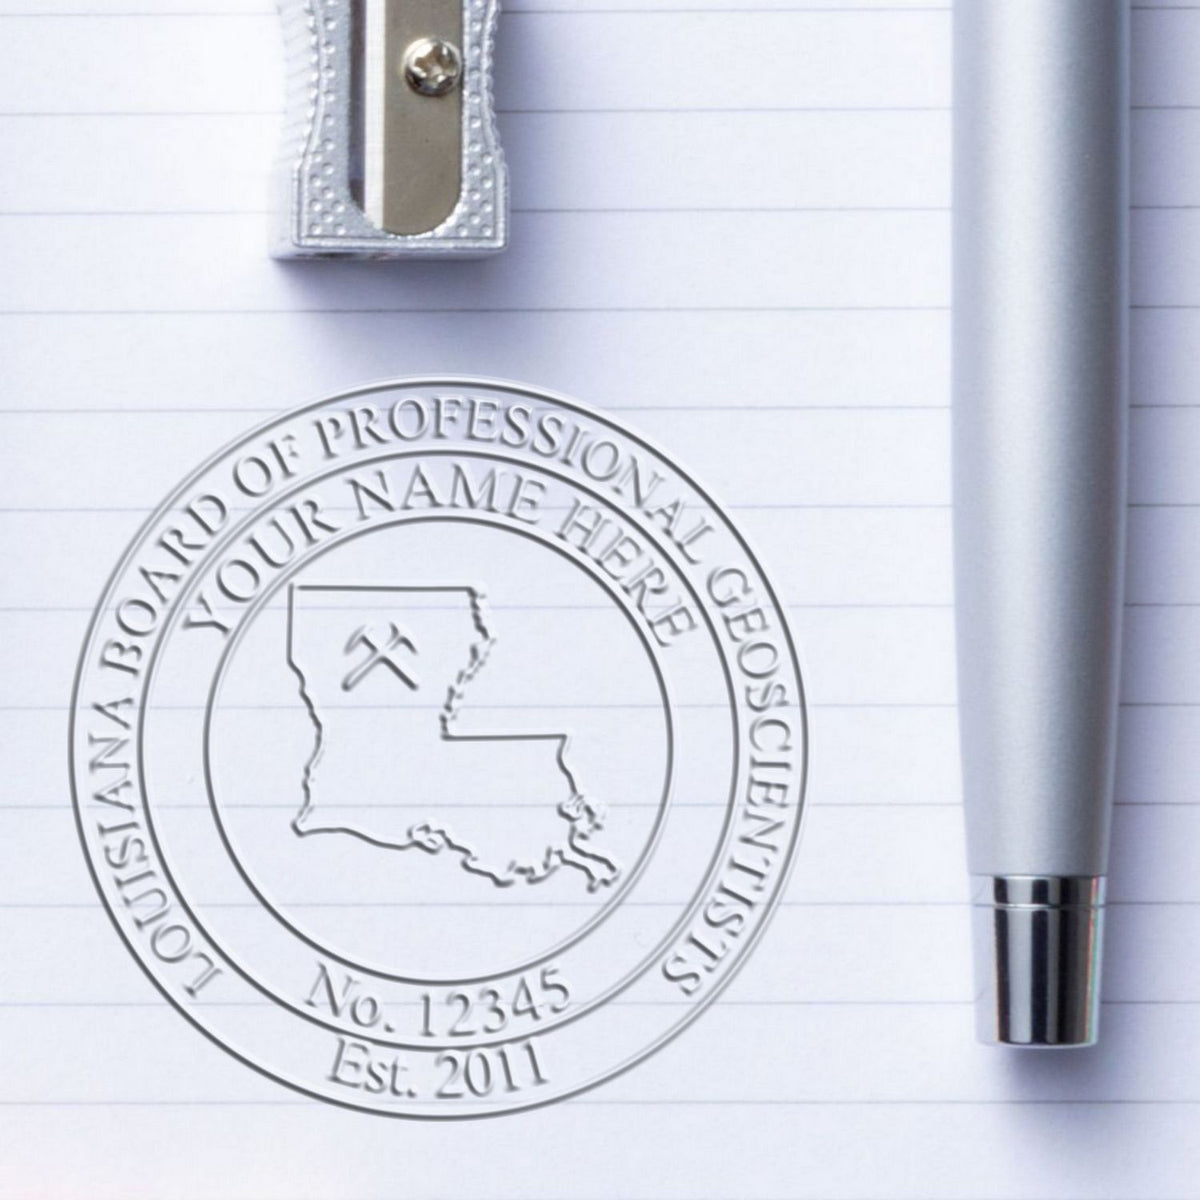 A photograph of the Soft Louisiana Professional Geologist Seal stamp impression reveals a vivid, professional image of the on paper.